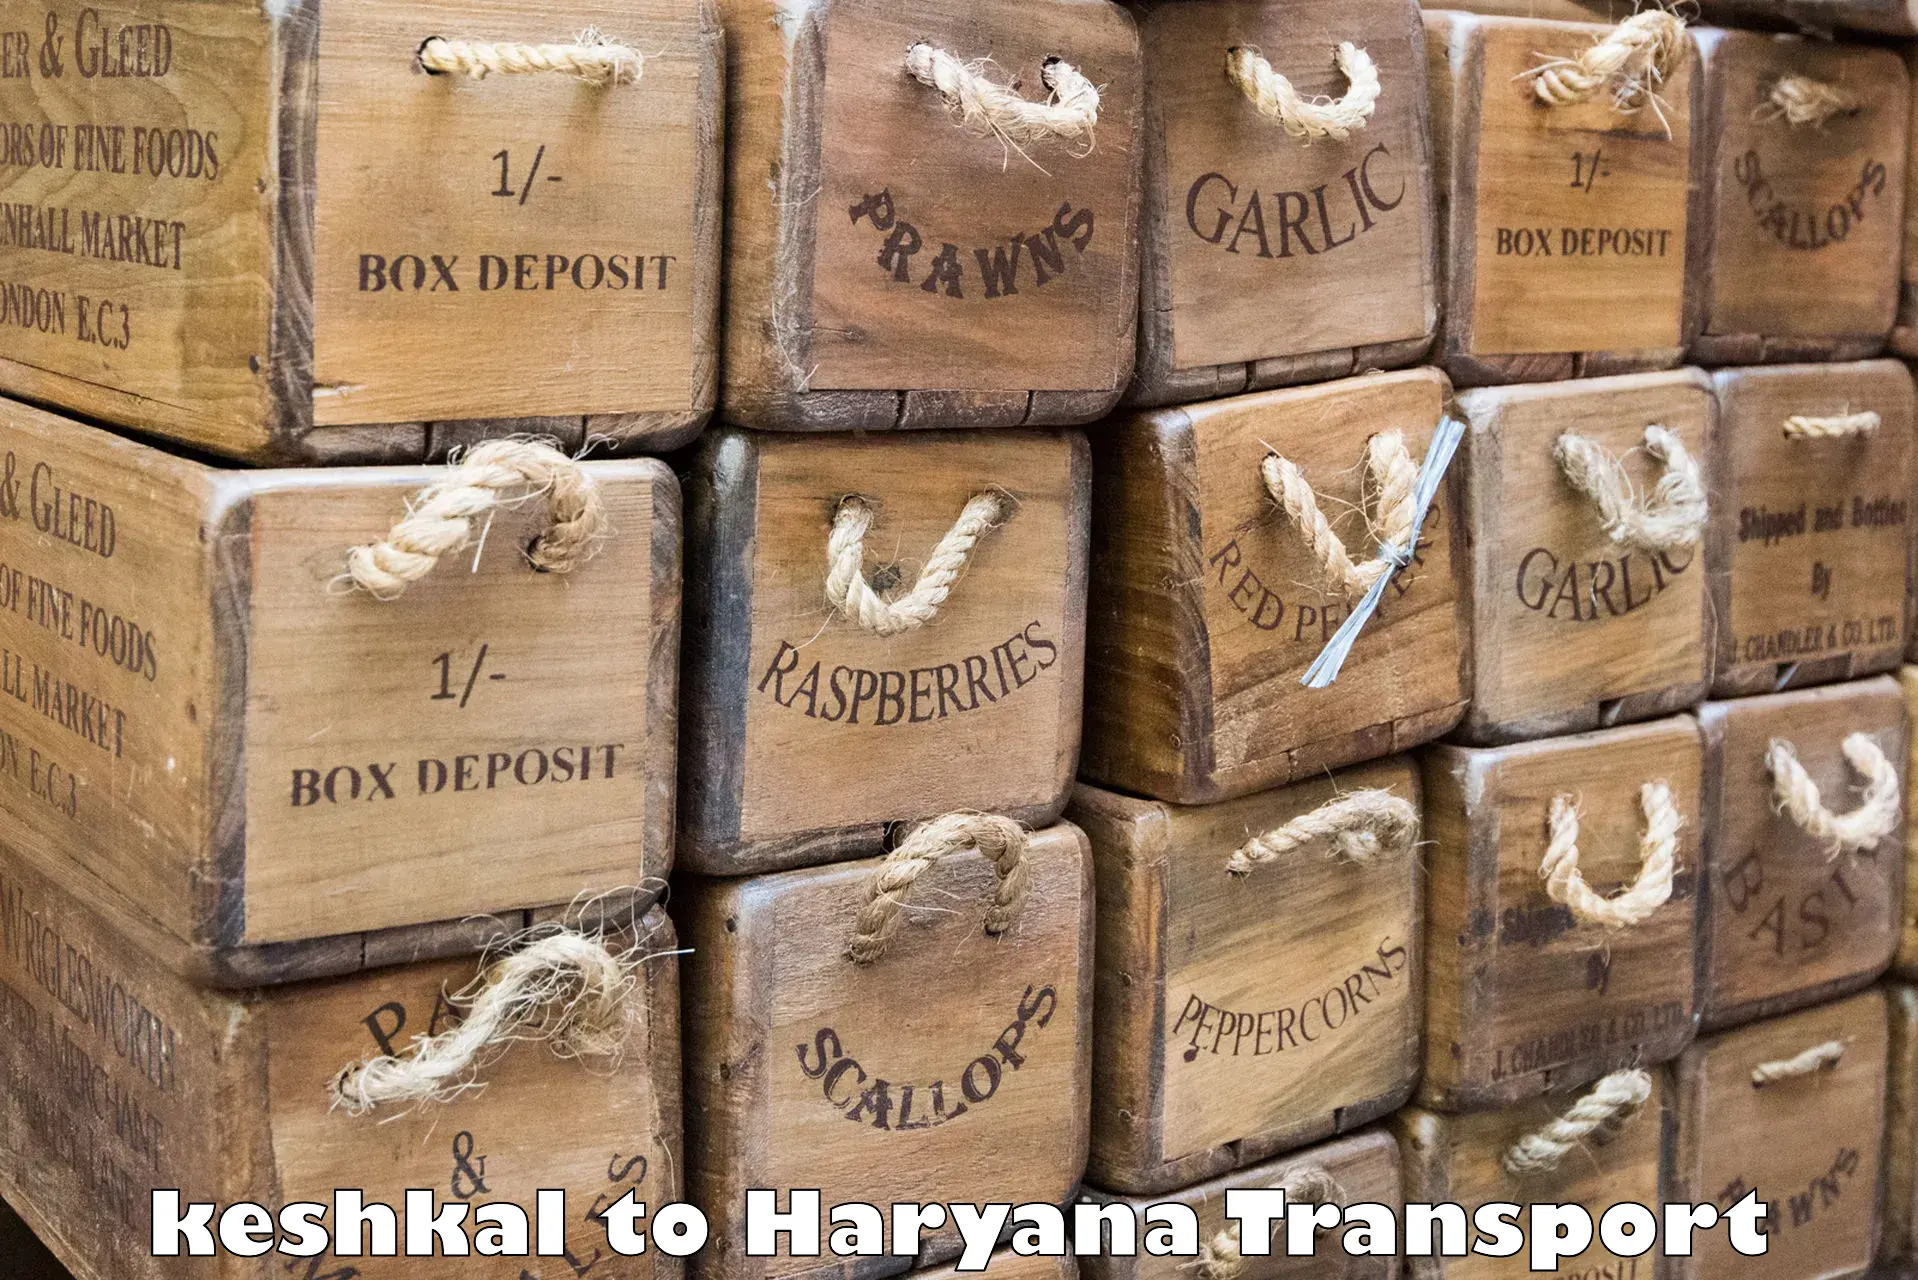 Nationwide transport services keshkal to NCR Haryana